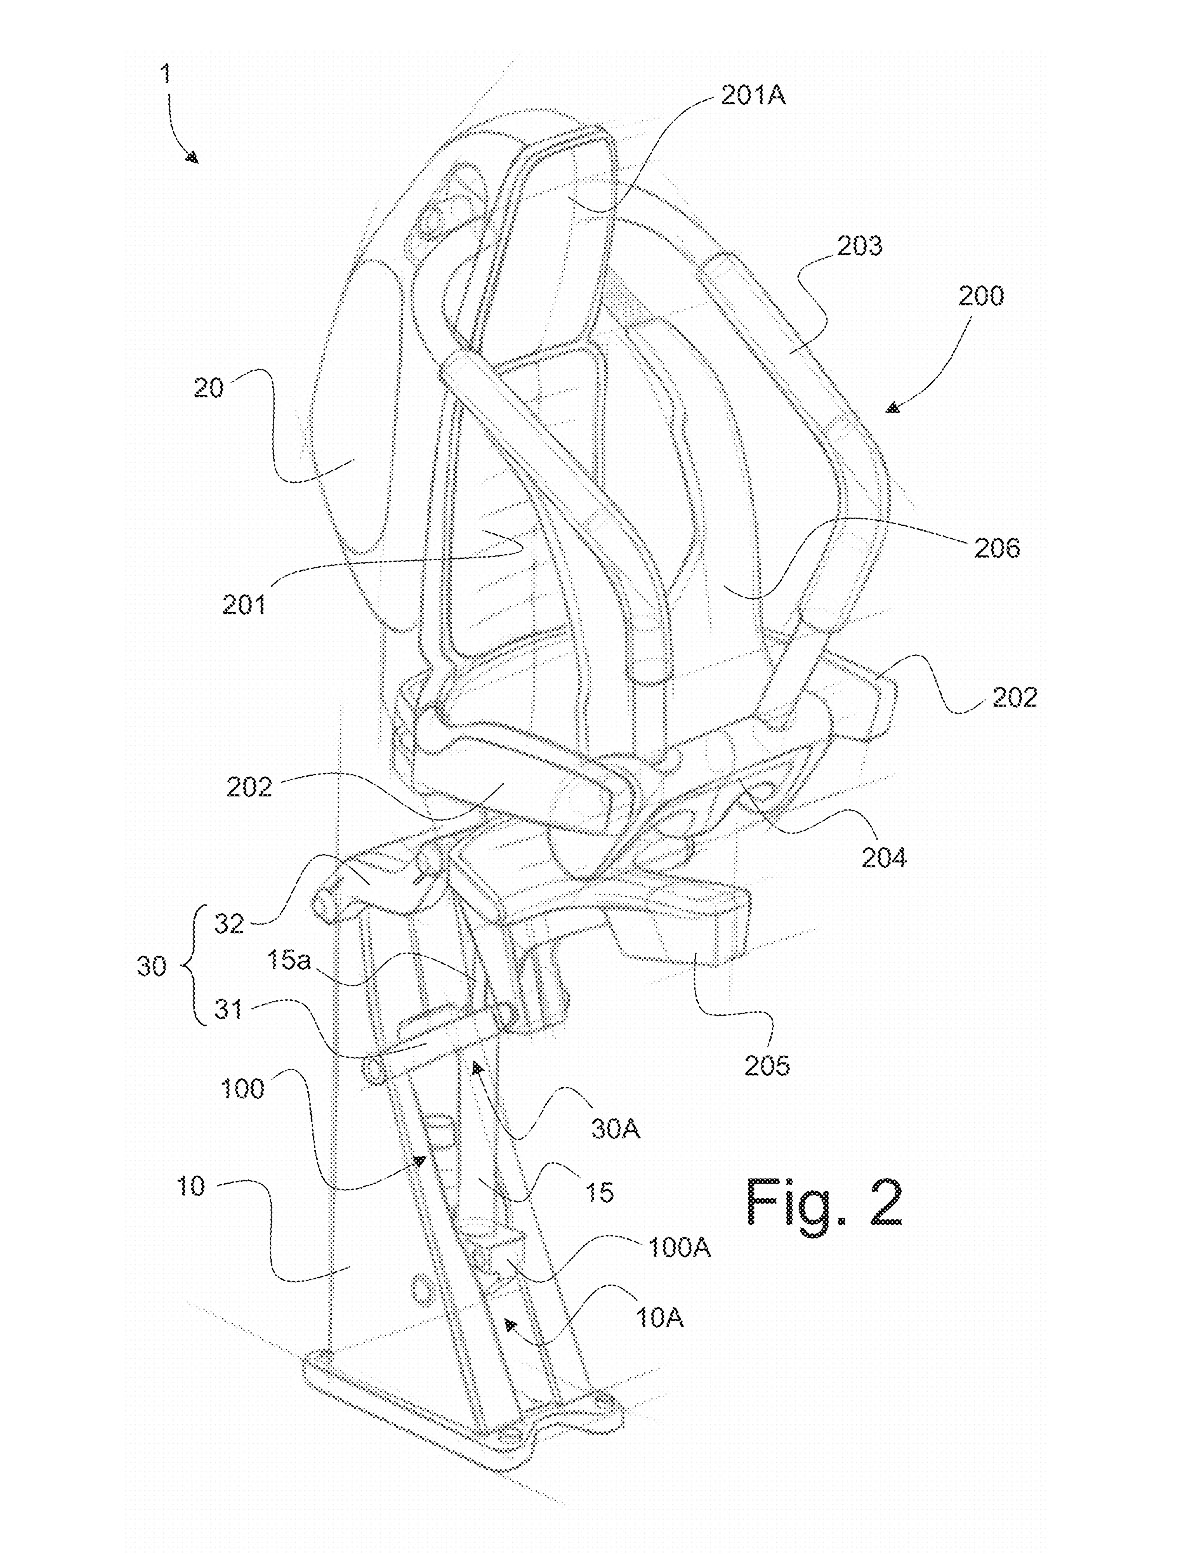 Bolliger &amp; Mabillard Files Patent for Stand-Up Coaster Restraint -  Coaster101